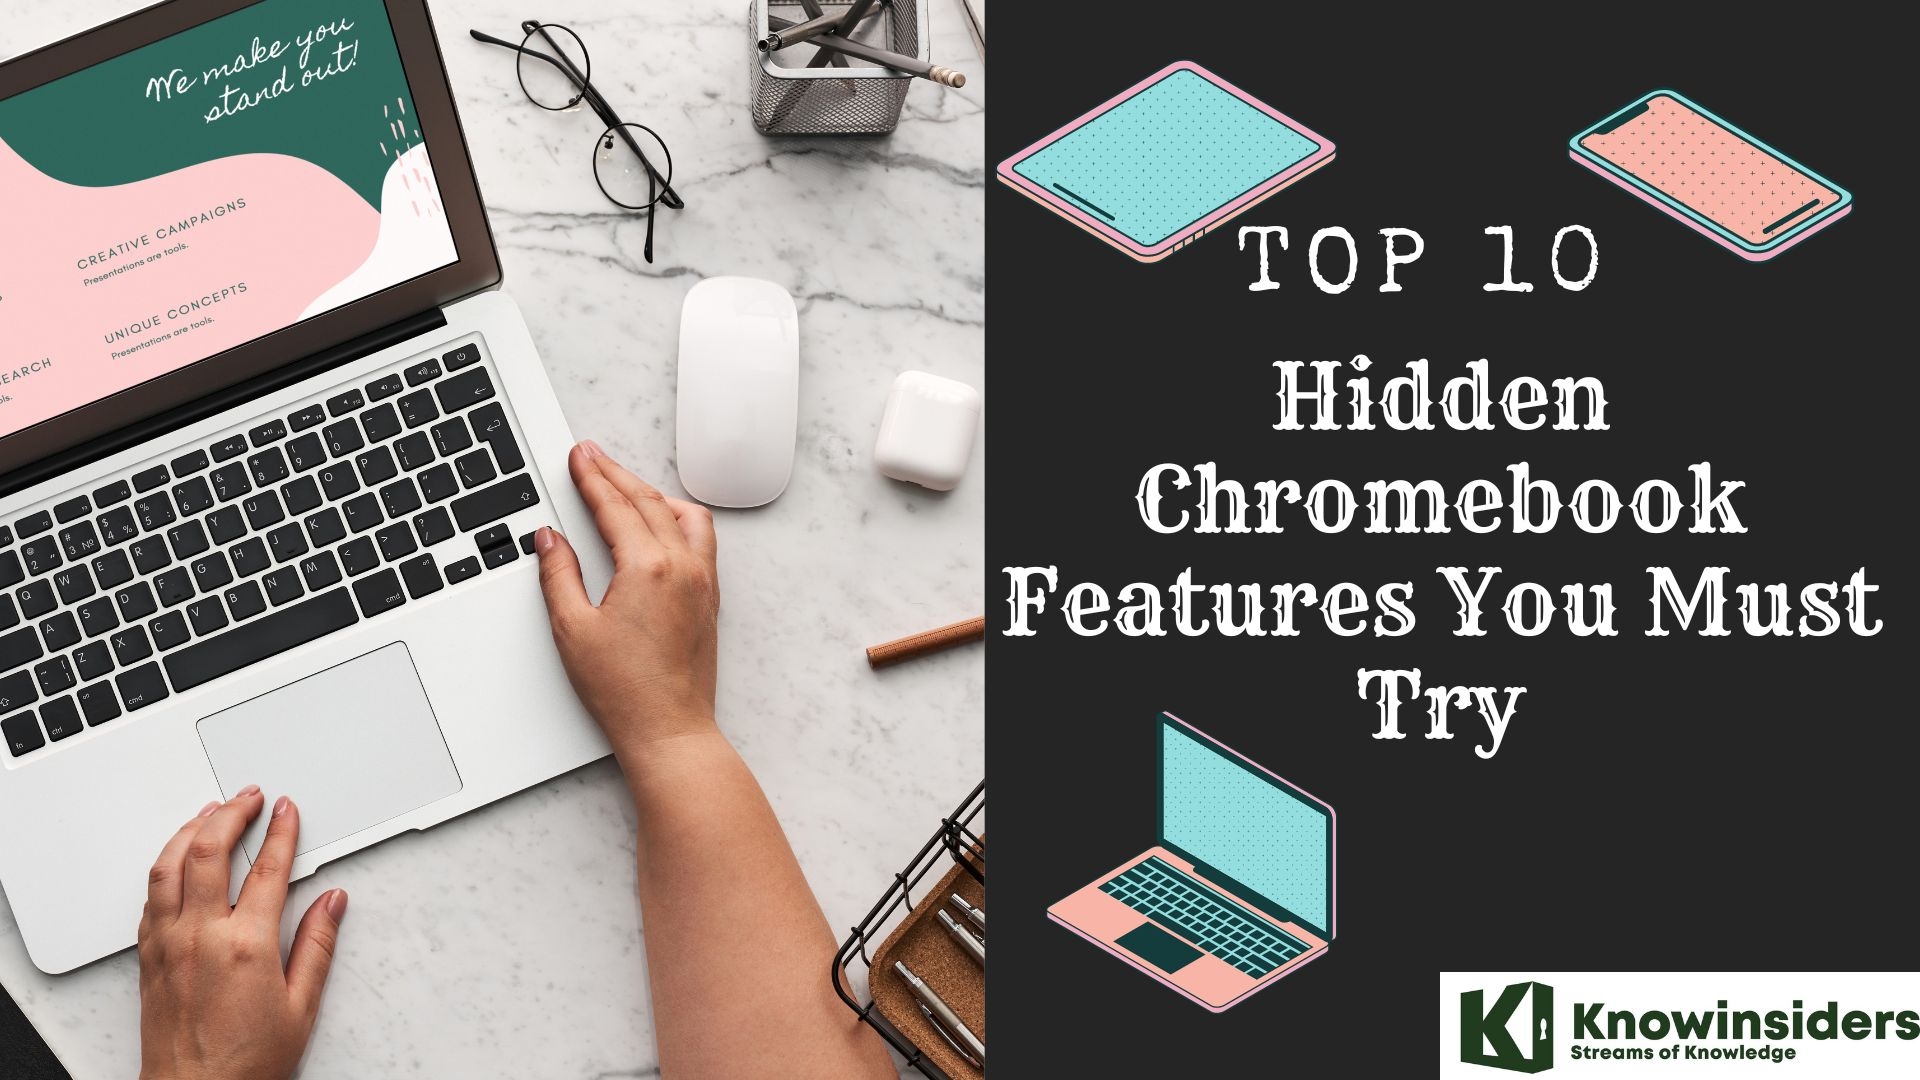 Top 10 Hidden Chromebook Features You Must Try Knowinsiders.com